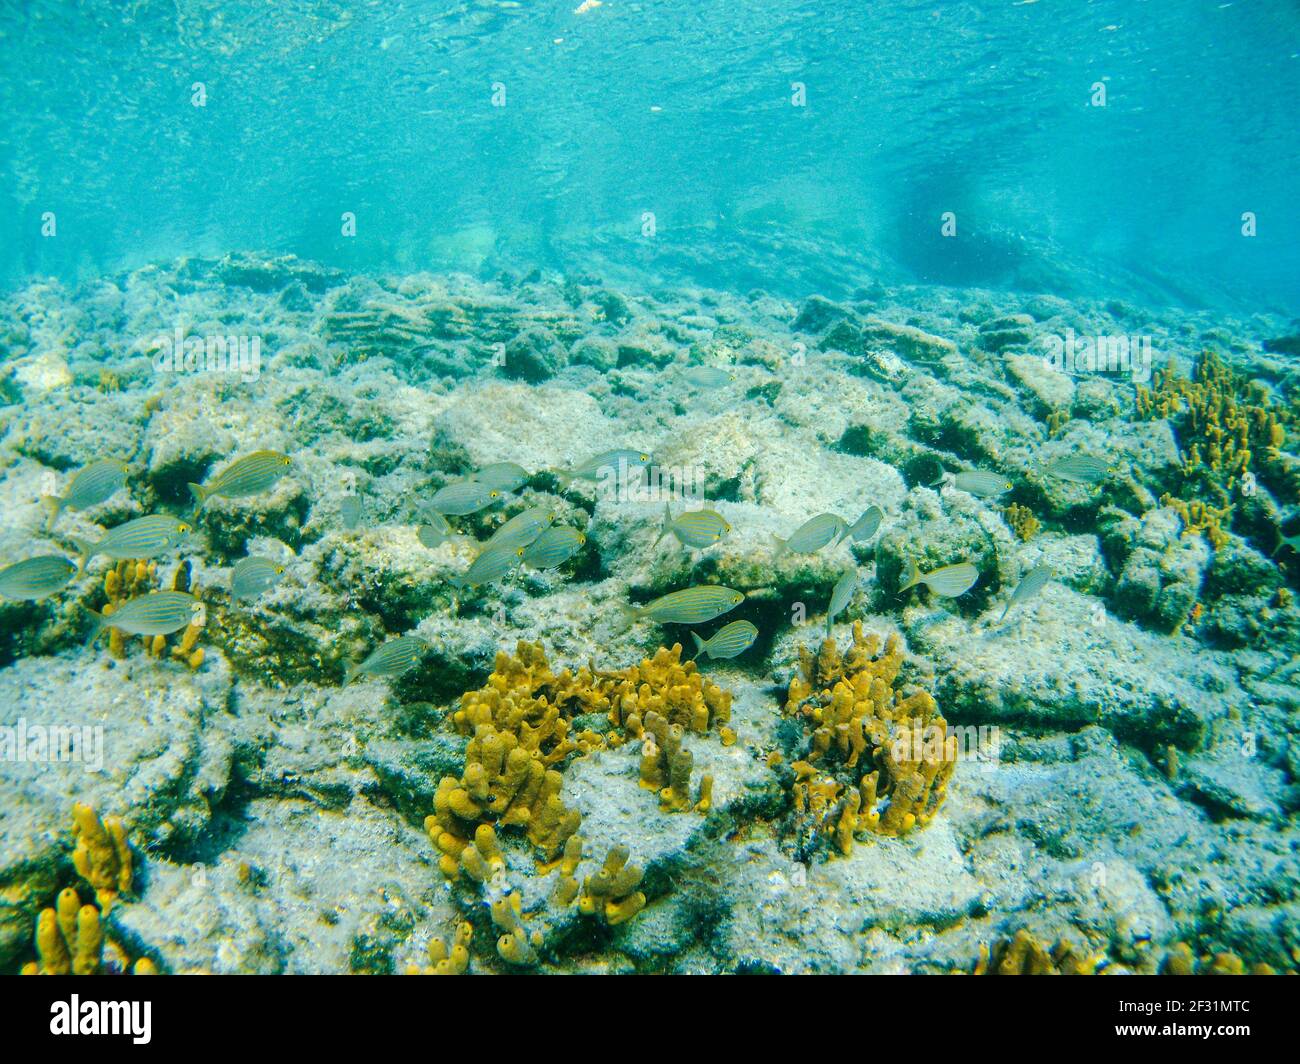 Underwater fish group swimming around rocks, yellow corals and seaweed in blue clear water of Ionian Sea in Greece. Diving, watching fish deep in wild Stock Photo